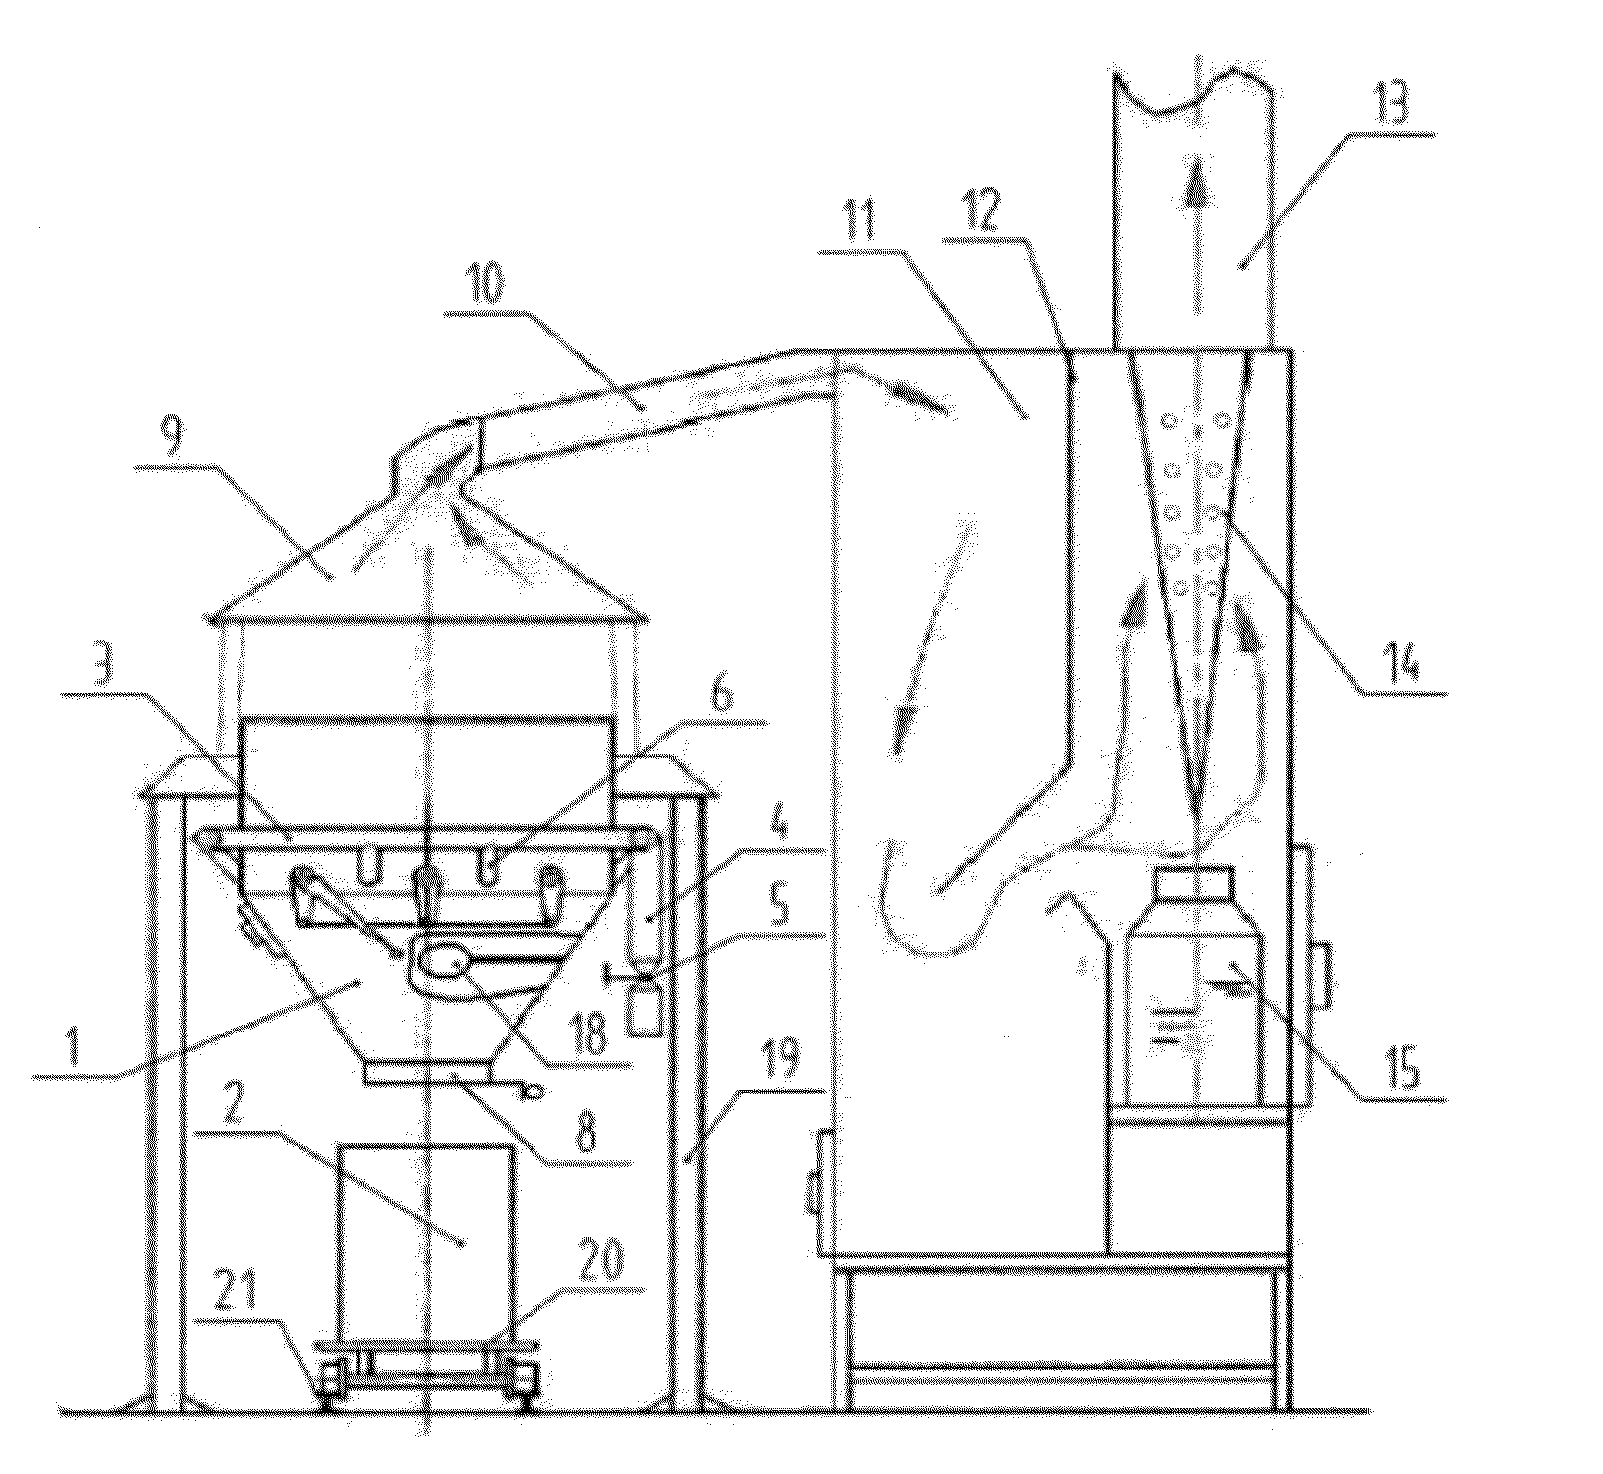 Method and device for carbonification of crop straws